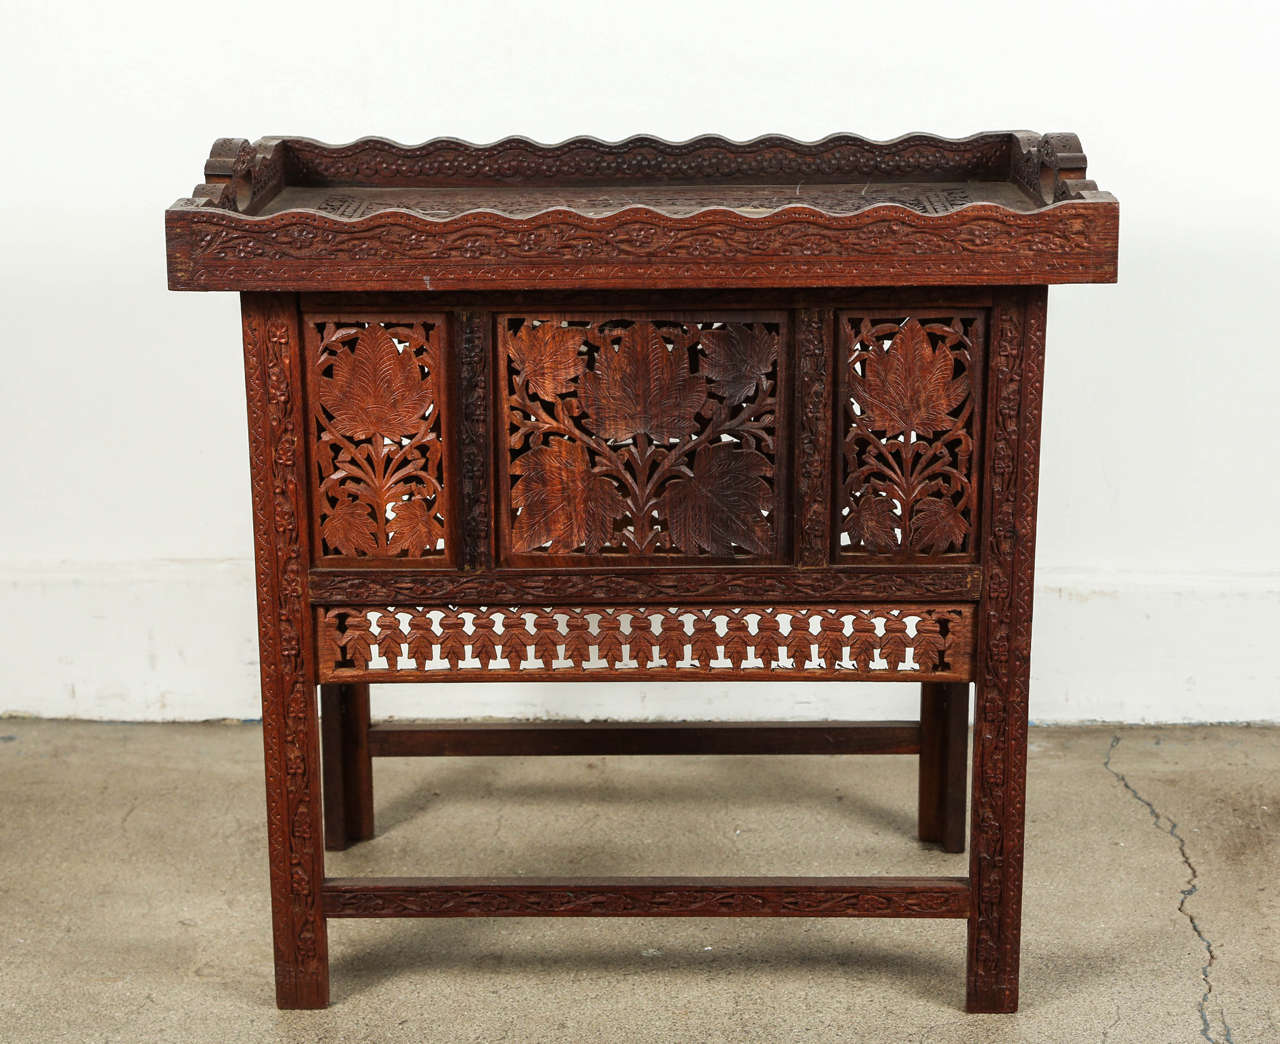 Nice Anglo-Indian tray table, intricately hand-carved and inlaid with ivory.
The tray is removable and the base fold flat.